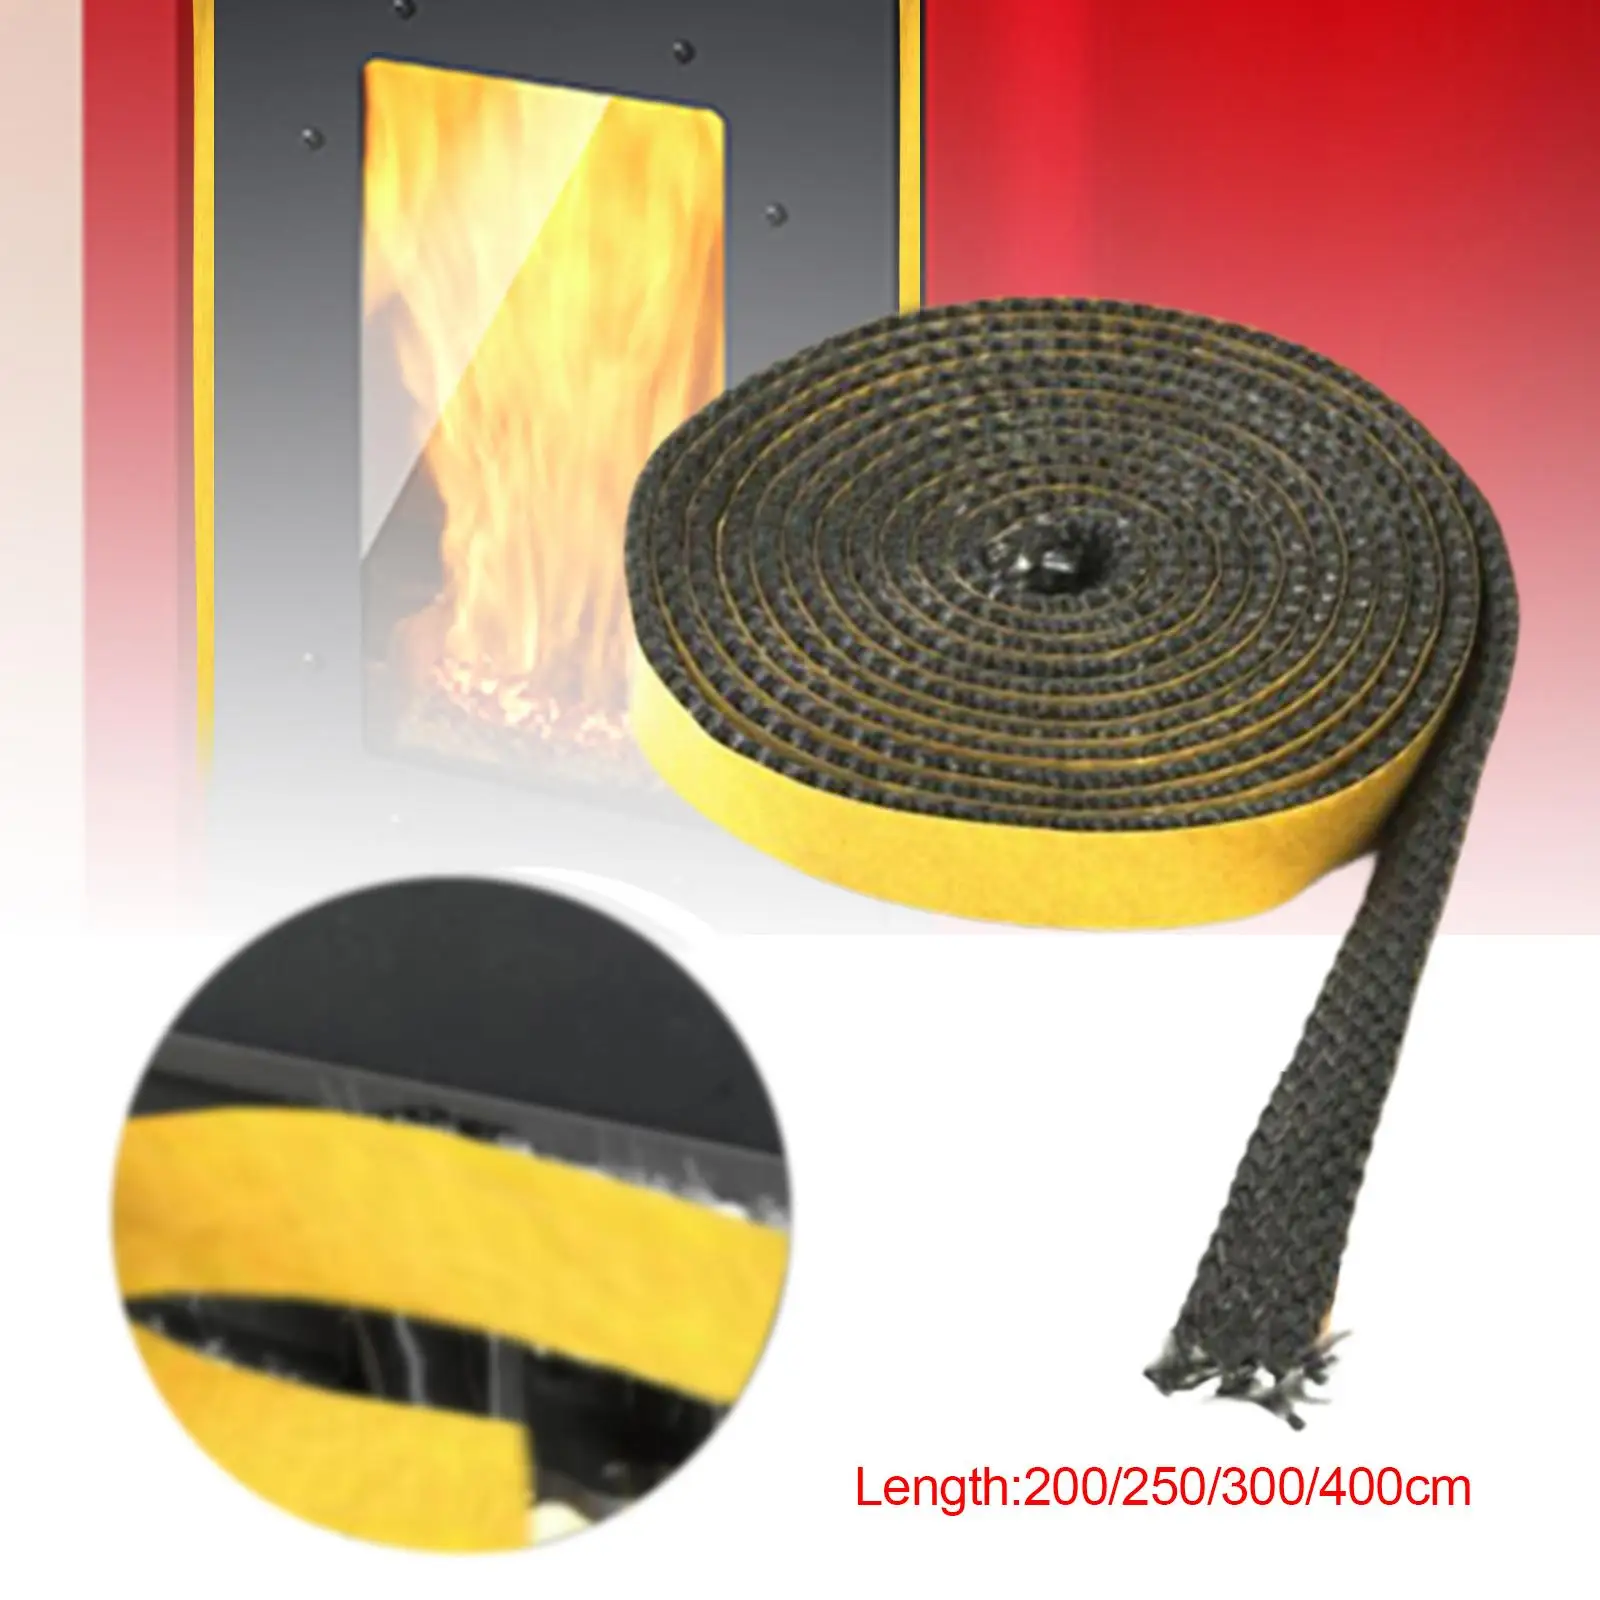 Wood Stoves Gasket Flat Stoves Rope Multifunction High Temperature Resistance Replaces Gasket Cord for Stoves Fireplace Door